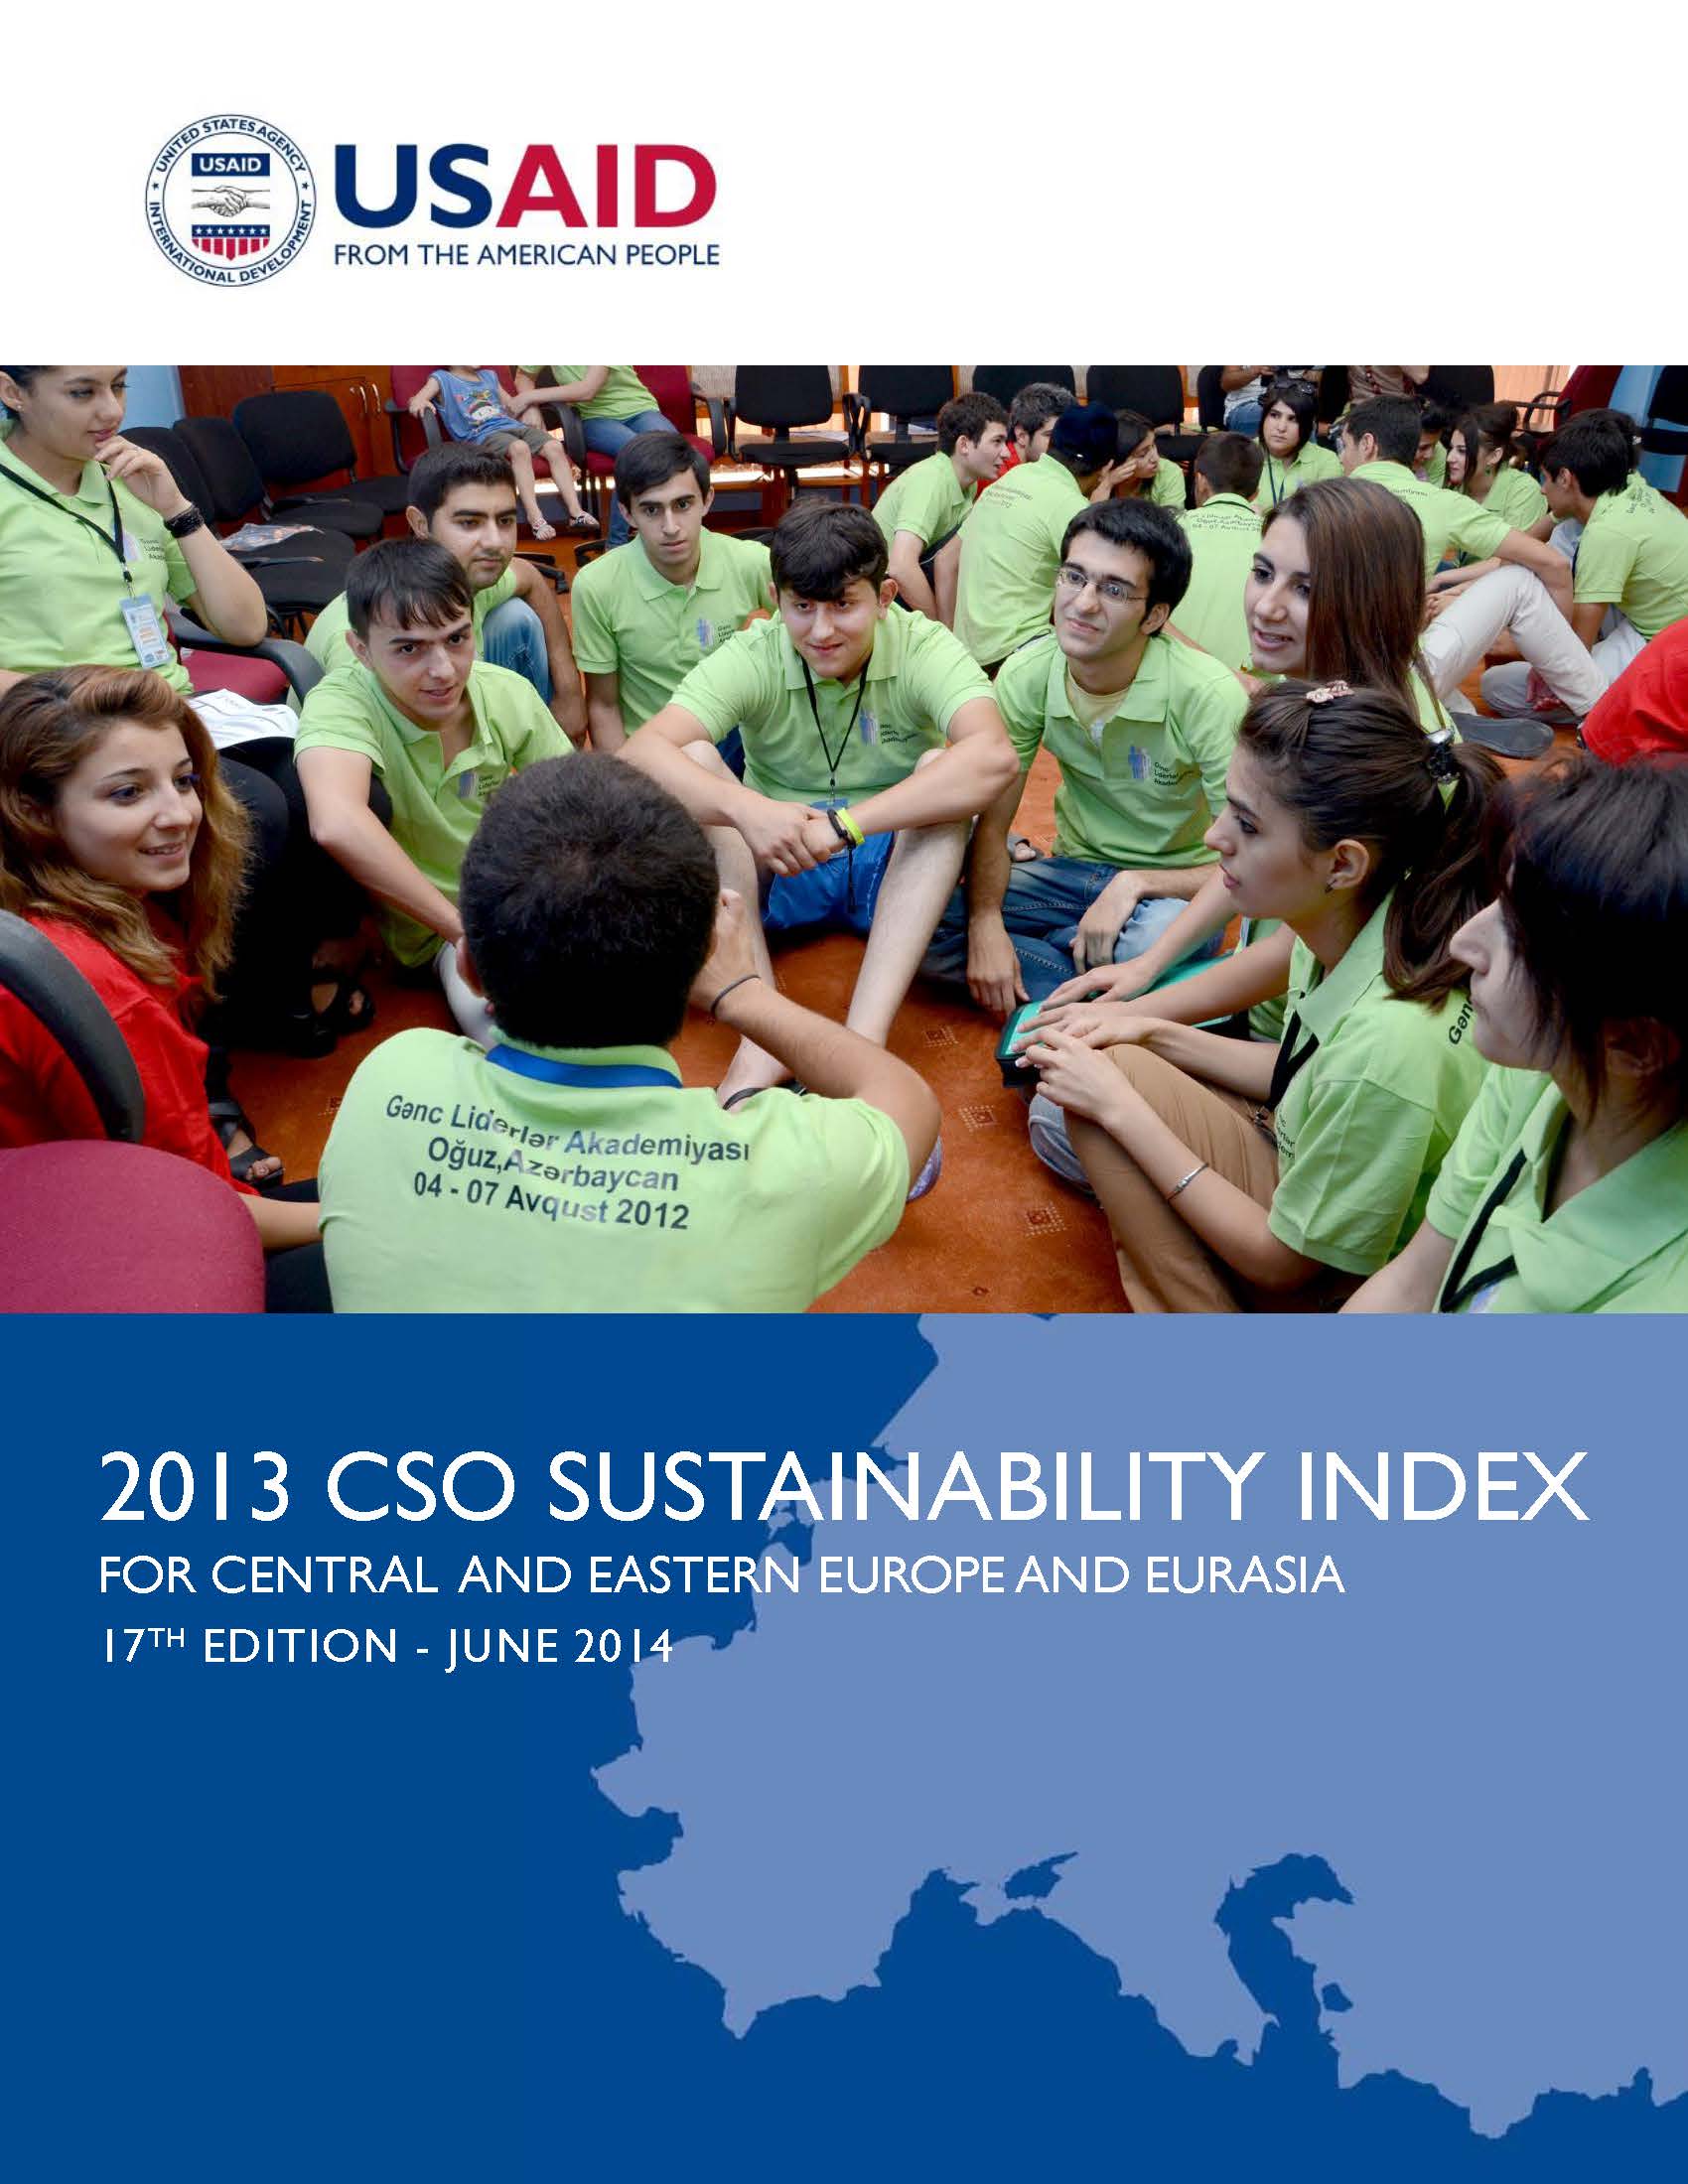 2013 CSO Sustainability Index for Central and Eastern Europe and Eurasia